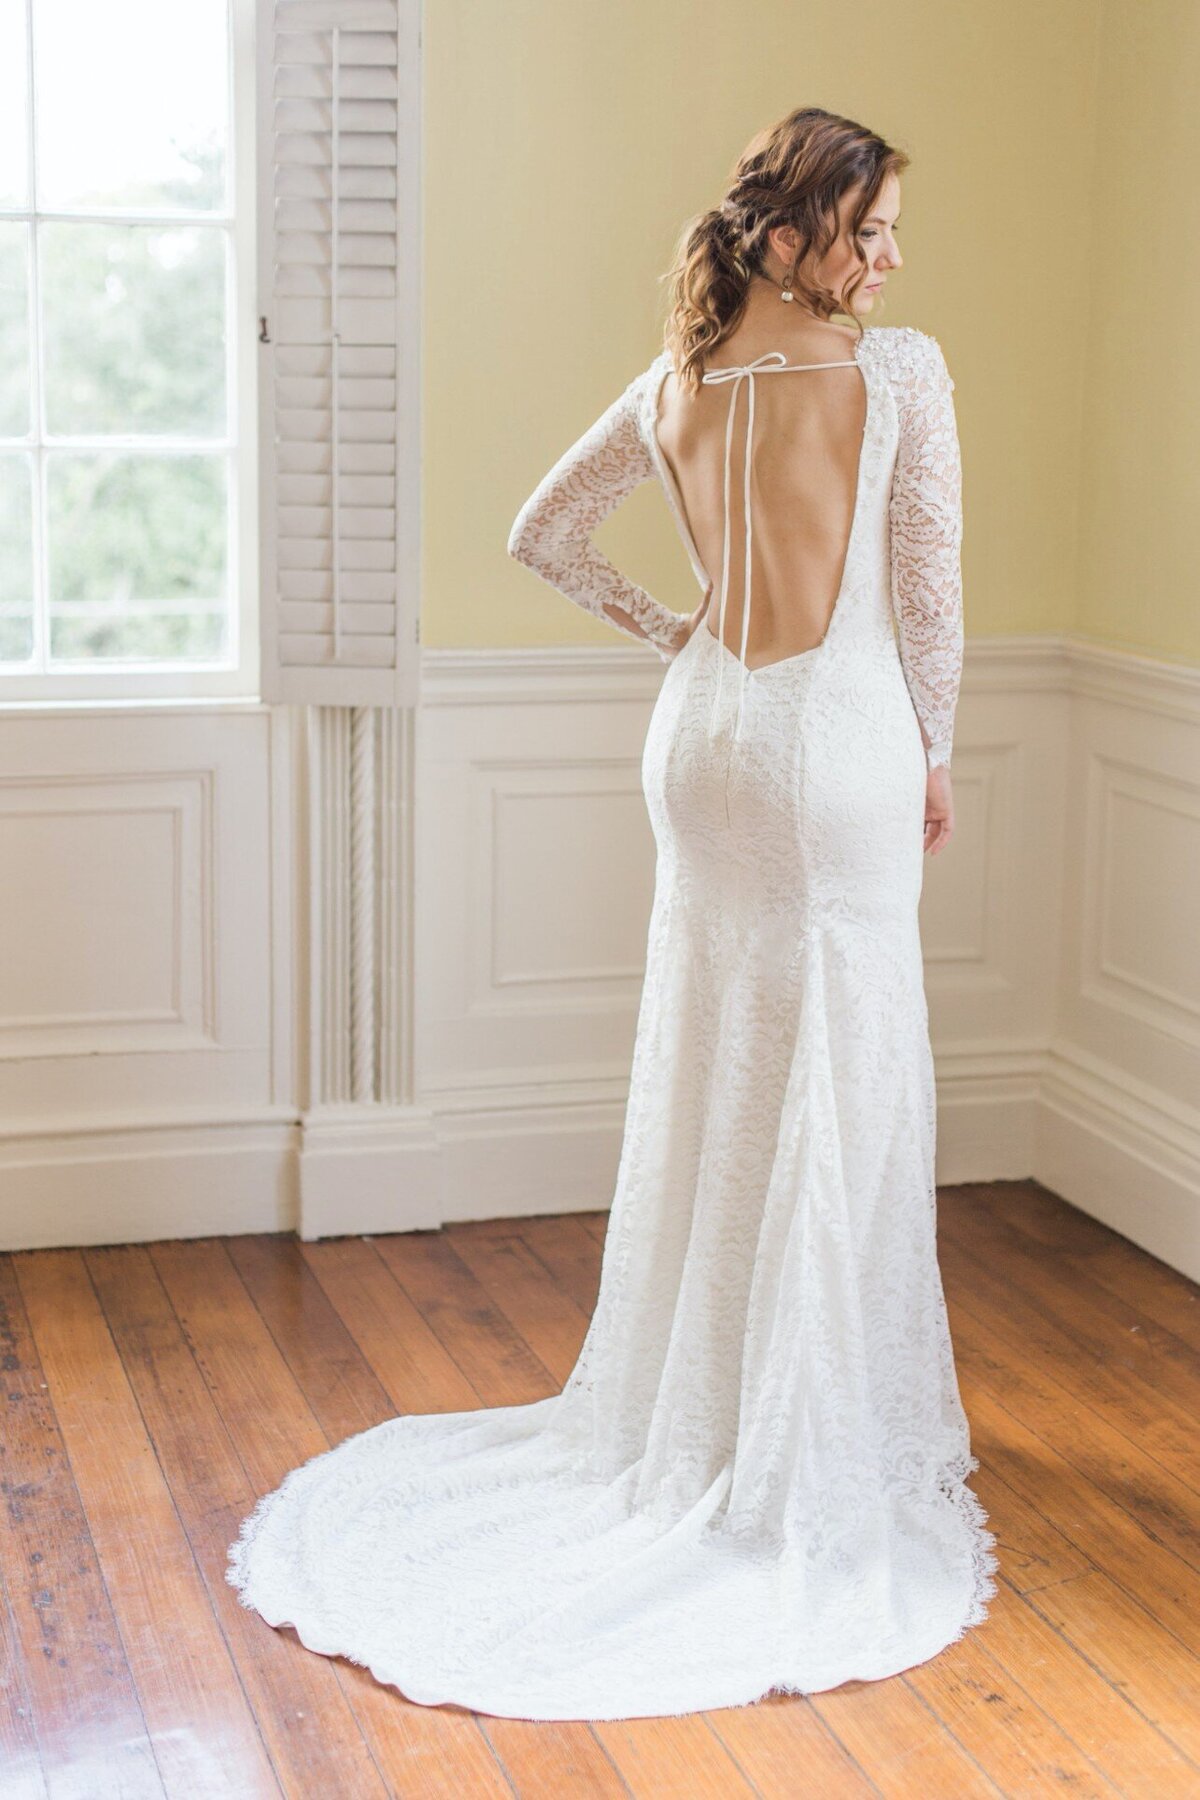 The Hudson bridal style is a low-back lace wedding dress with long sleeves and a scallop edge hem that goes all the way around the train as well.